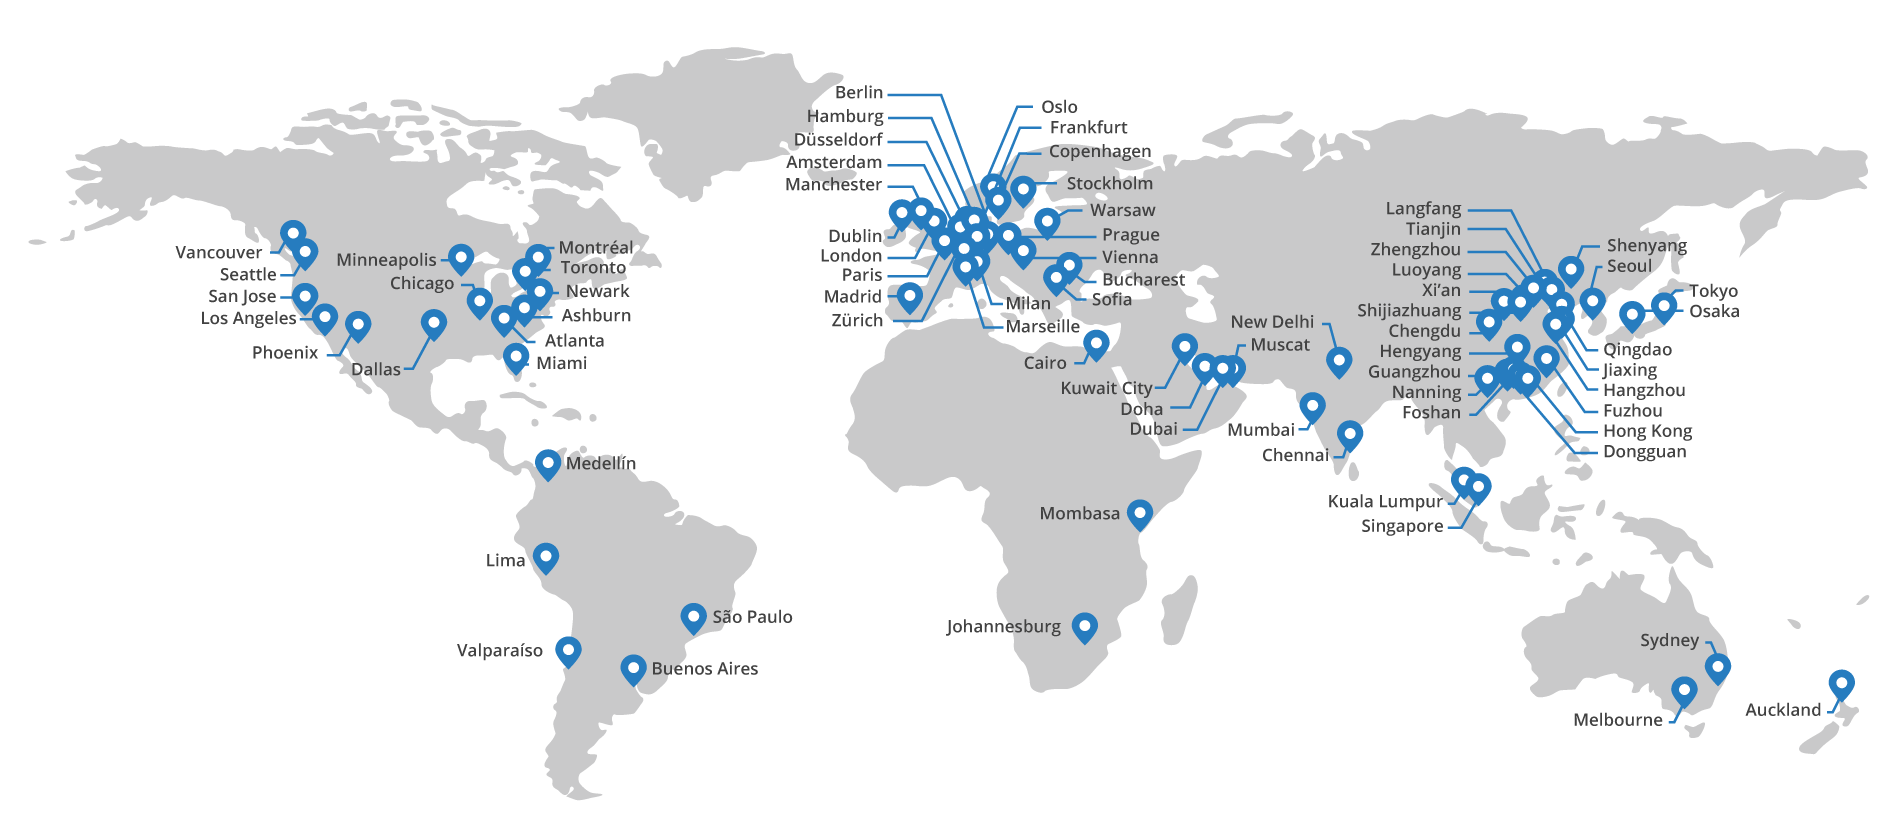 Image showing CloudFlare's data centers source